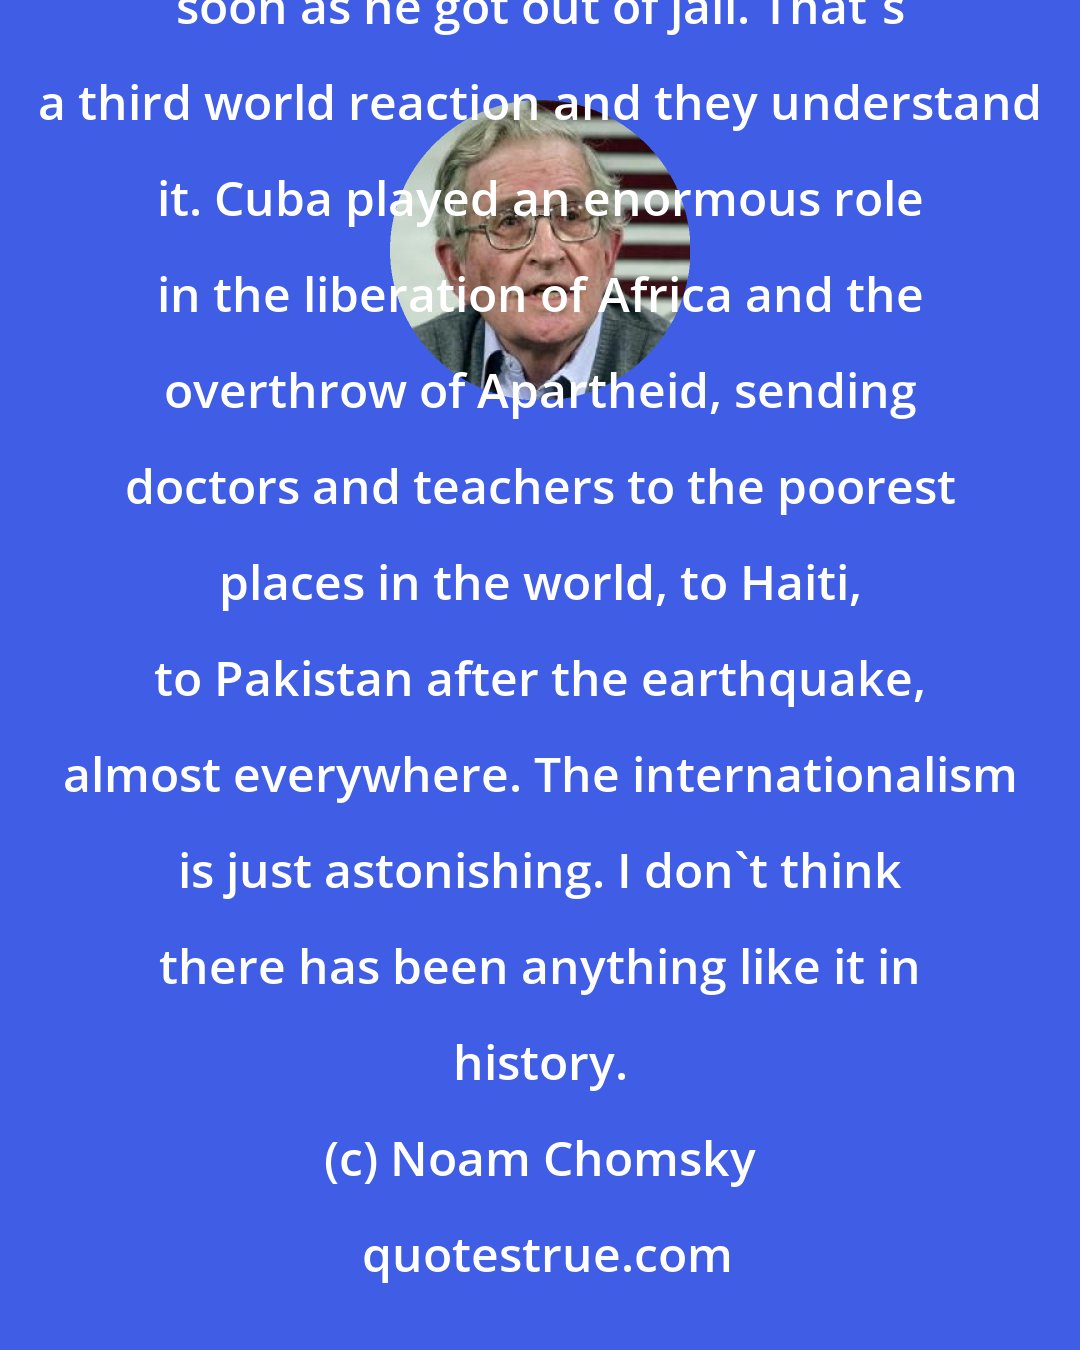 Noam Chomsky: There is a reason why Nelson Mandela went to Cuba to praise Castro and thank the Cuban people almost as soon as he got out of jail. That's a third world reaction and they understand it. Cuba played an enormous role in the liberation of Africa and the overthrow of Apartheid, sending doctors and teachers to the poorest places in the world, to Haiti, to Pakistan after the earthquake, almost everywhere. The internationalism is just astonishing. I don't think there has been anything like it in history.